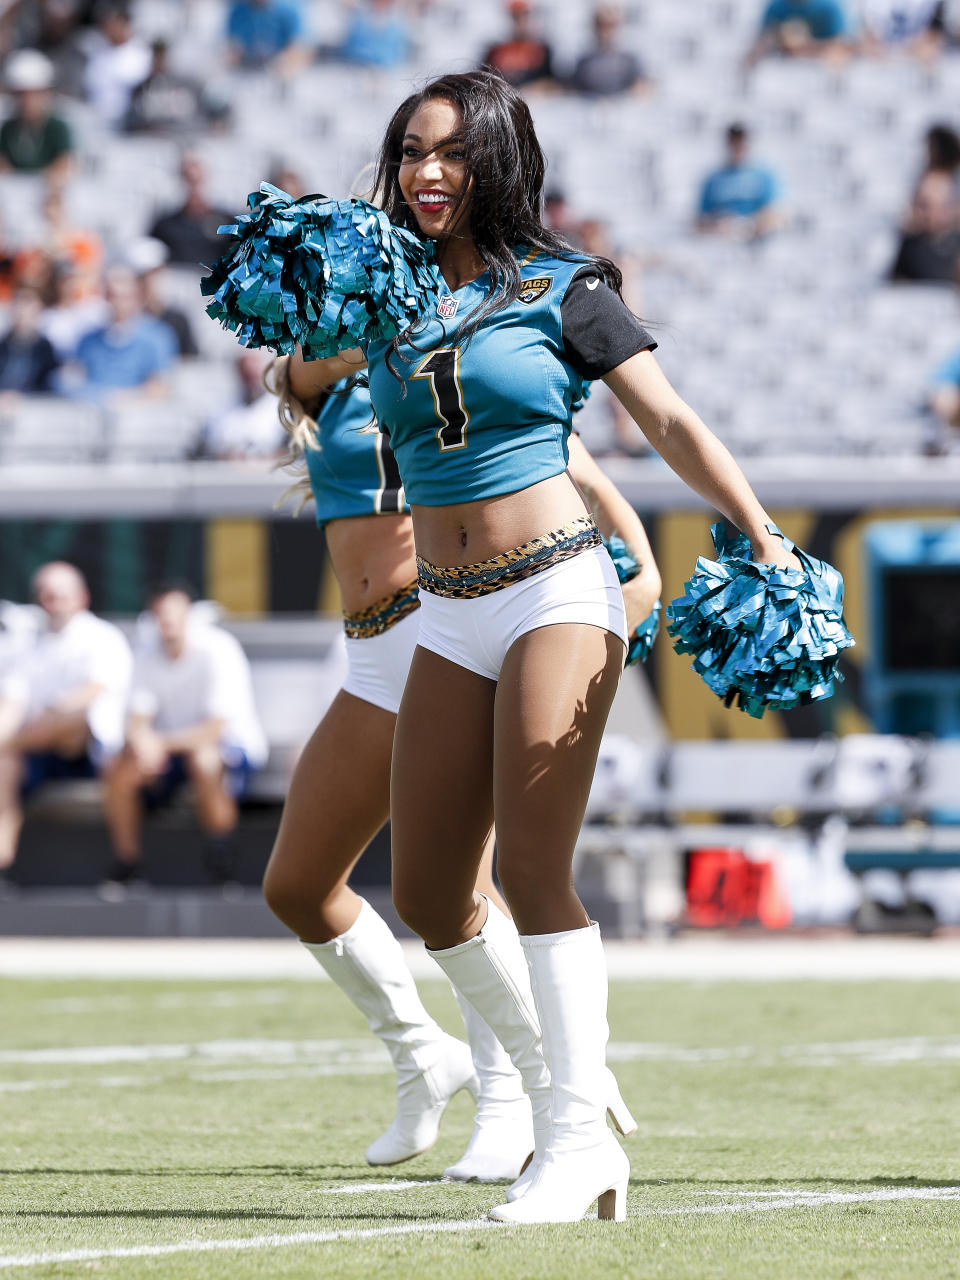 <p>The ROAR Cheerleaders of the Jacksonville Jaguars performs before the start of the game against the Cincinnati Bengals at EverBank Field on November 5, 2017 in Jacksonville, Florida. The Jaguars defeated the Bengals 23 to 7. (Photo by Don Juan Moore/Getty Images) </p>